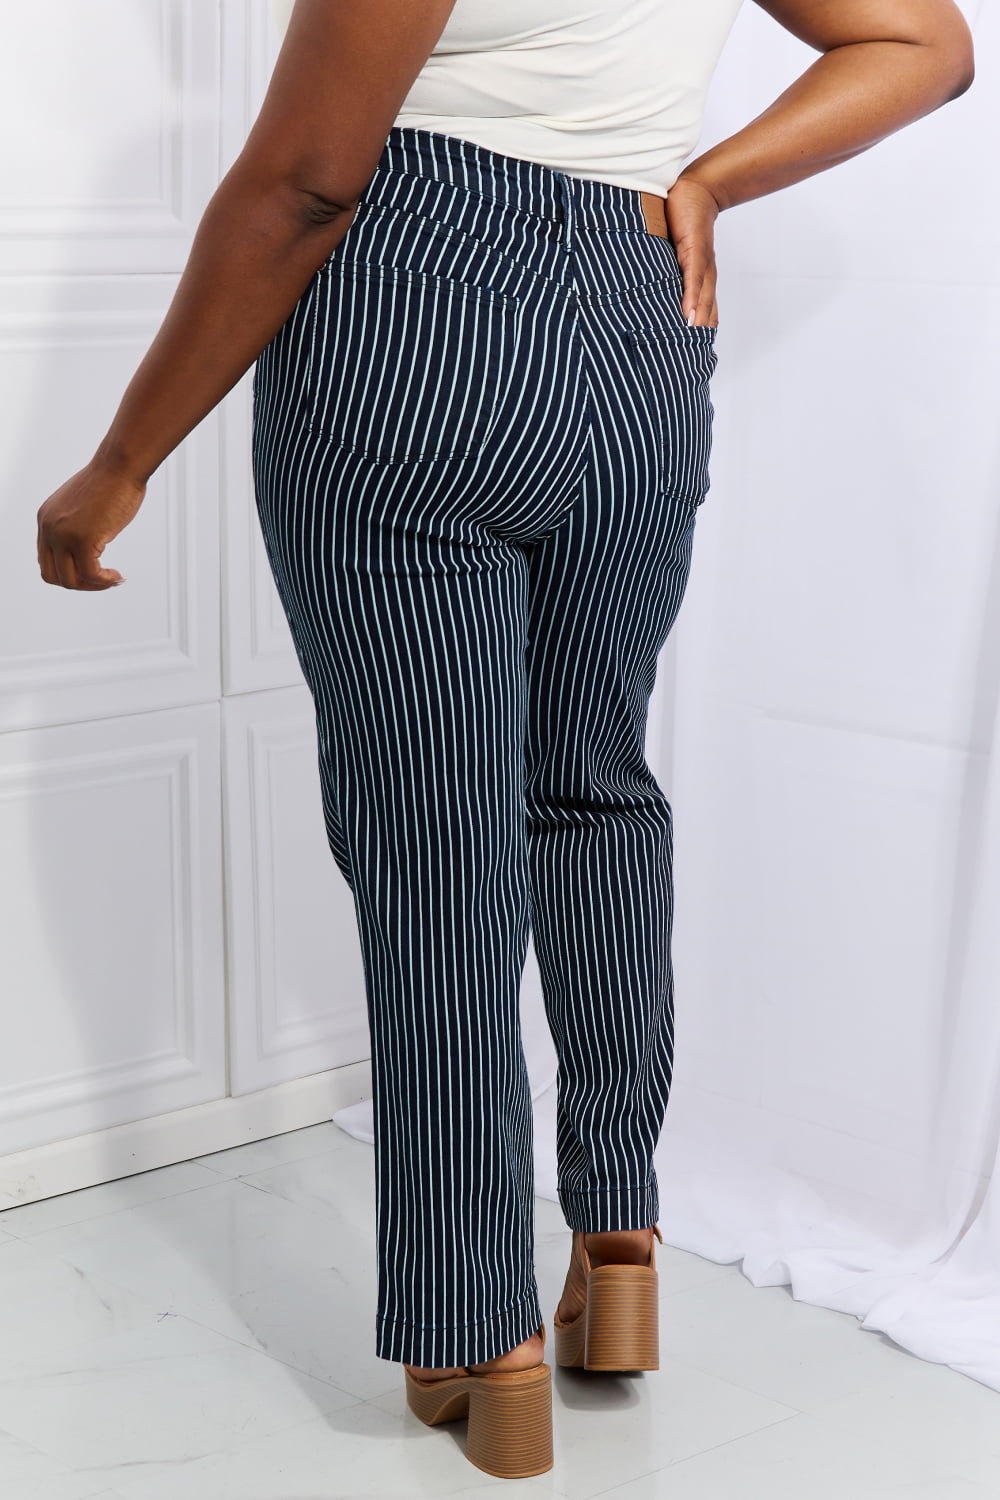 Judy Blue Cassidy Full Size High Waisted Tummy Control Striped Straight Jeans-Denim-Inspired by Justeen-Women's Clothing Boutique in Chicago, Illinois